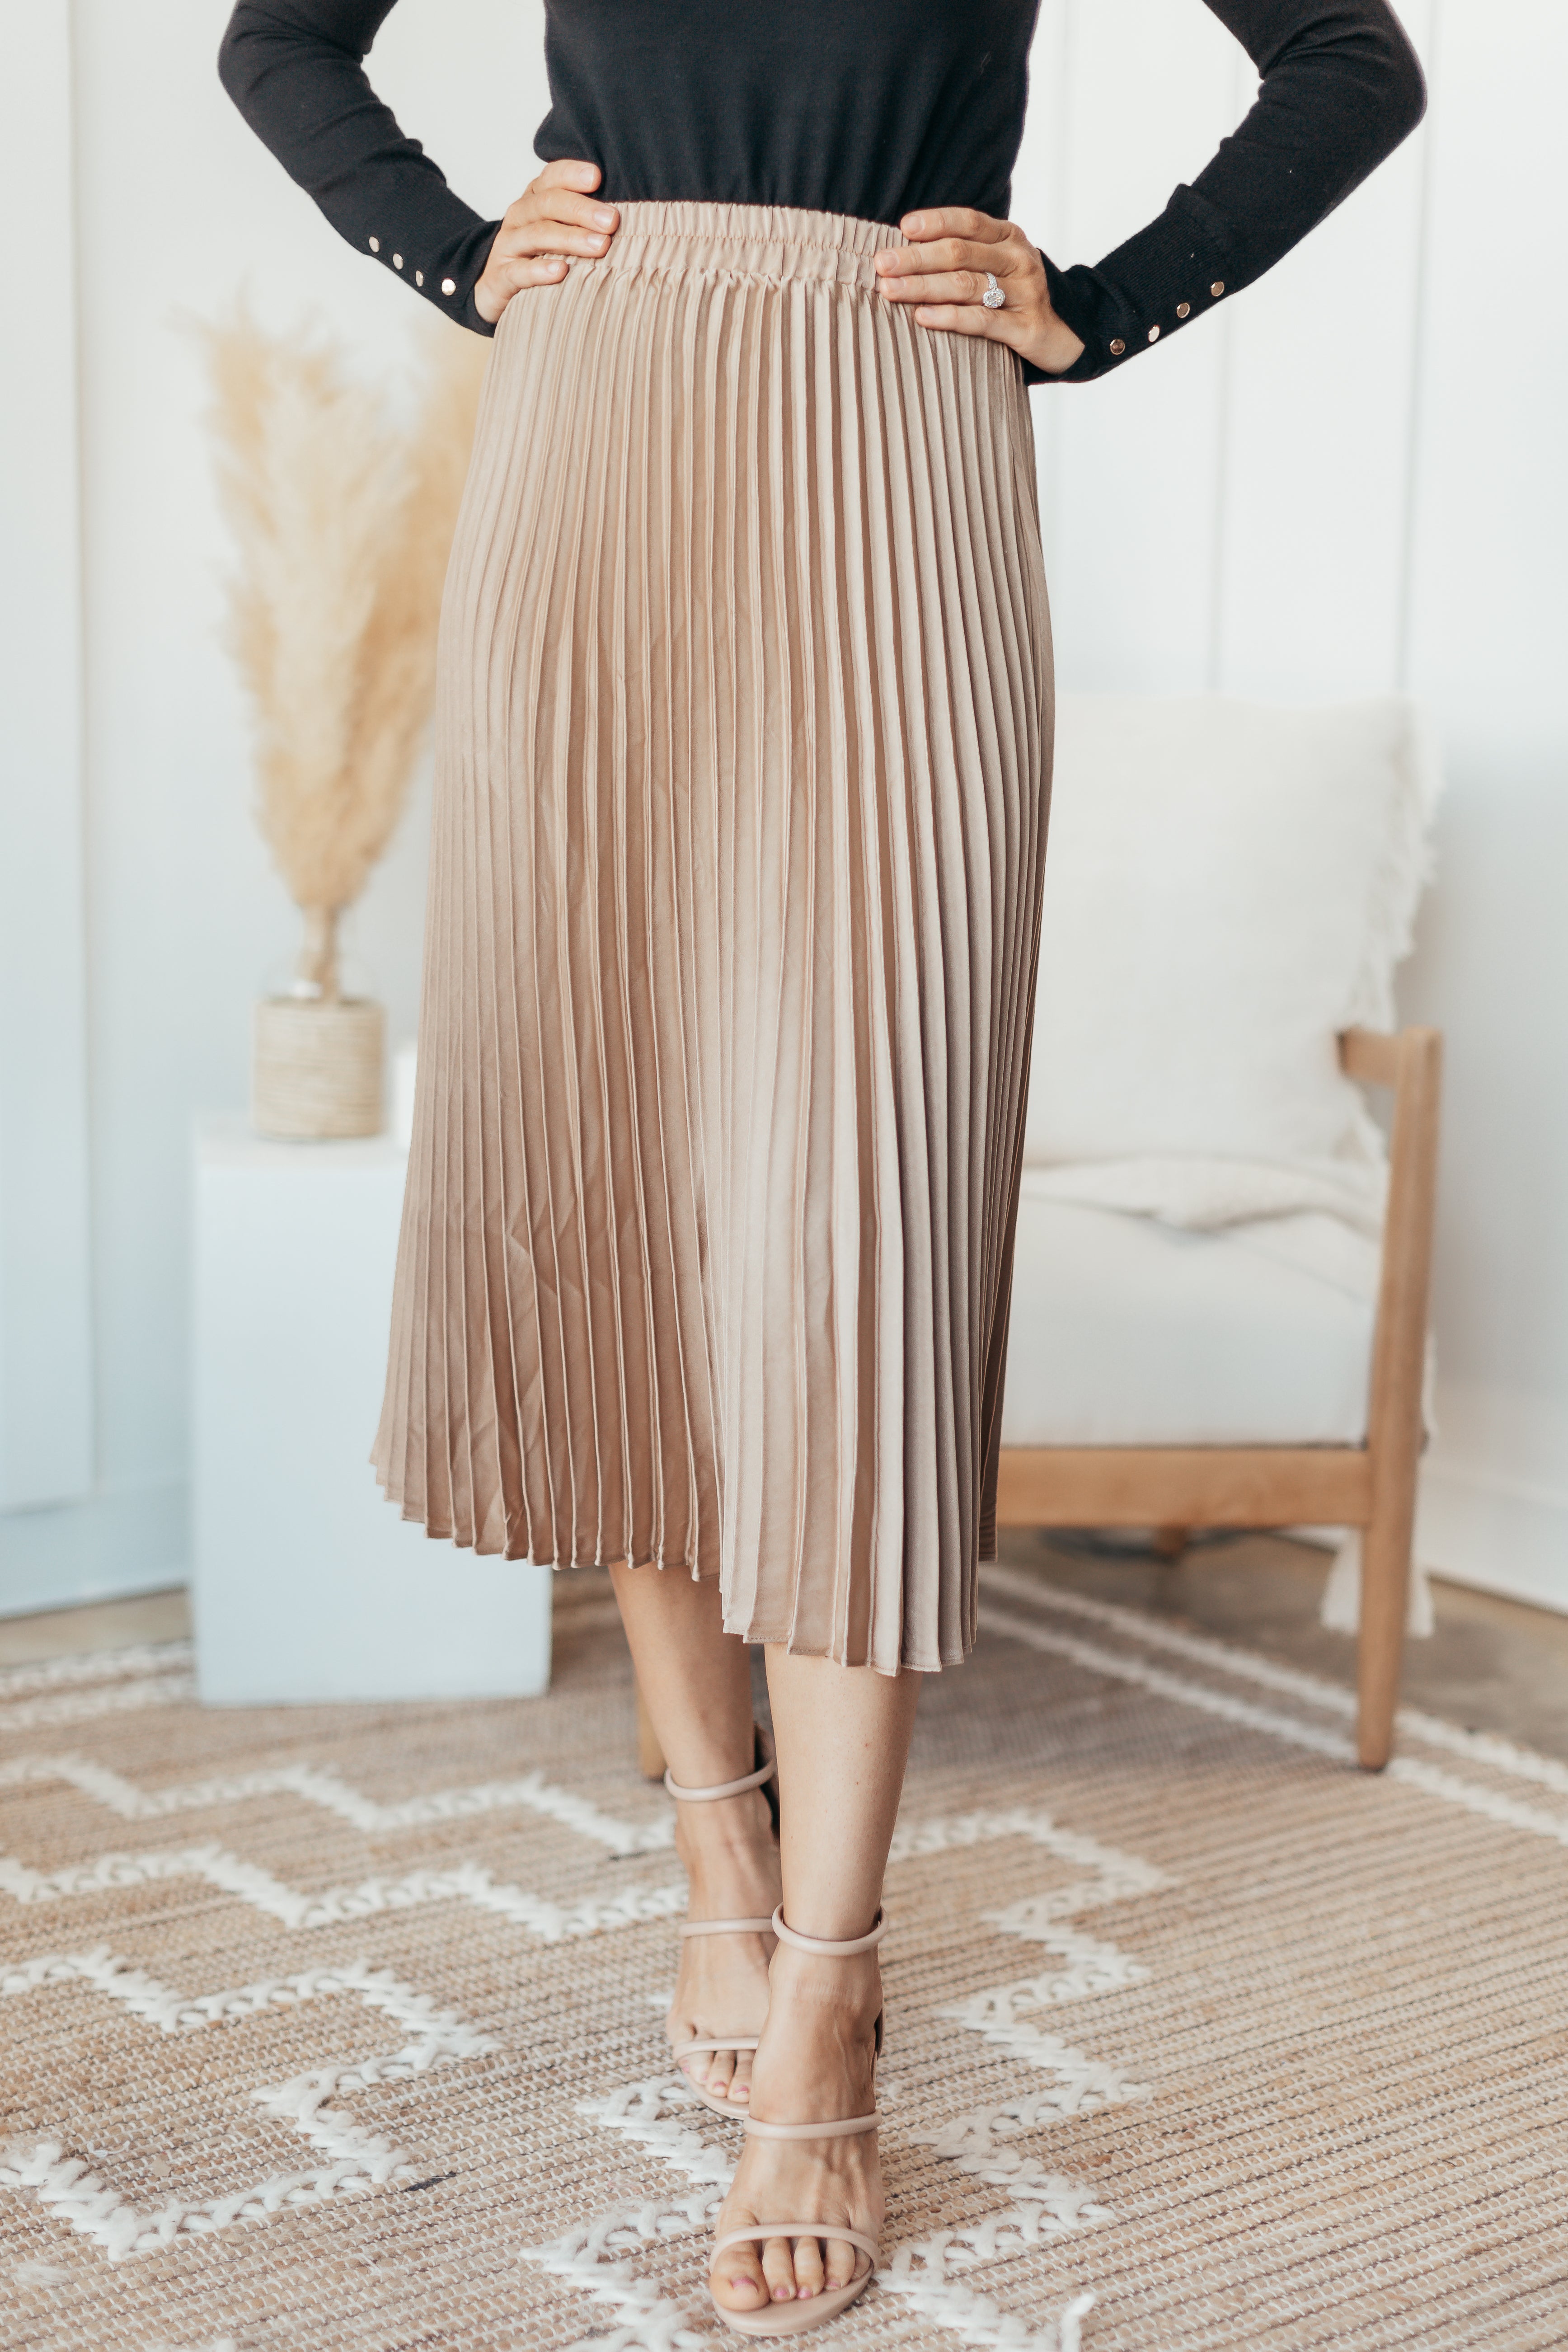 Sunday Service Pleated Skirt - 2 Colors